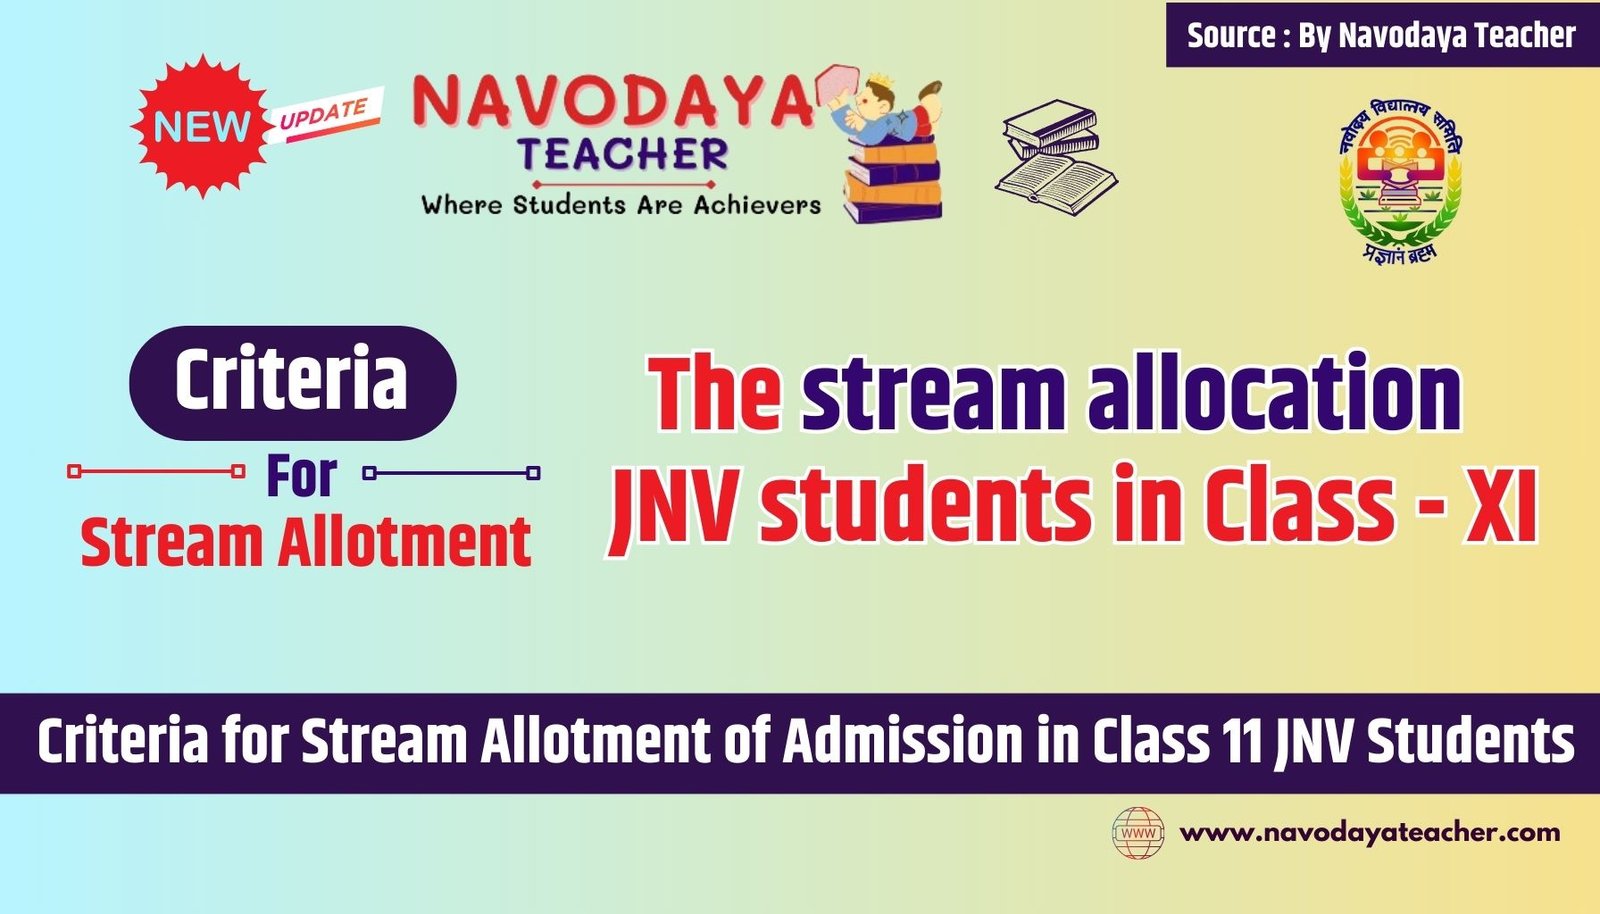 Criteria for Class 11 Stream Allotment Admission in Navodaya